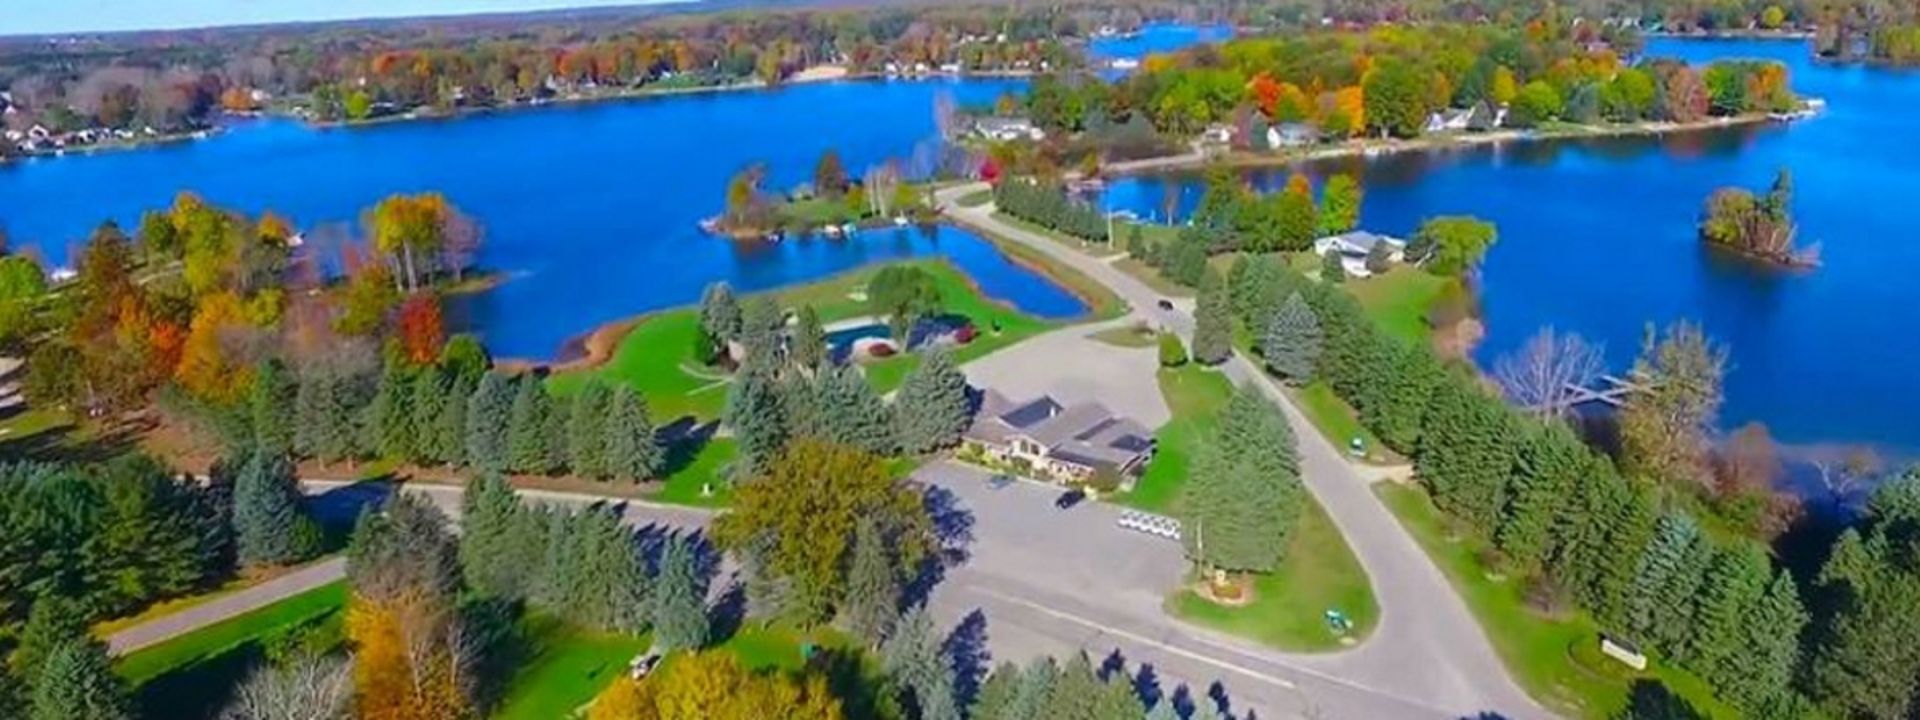 Build your Dream Home Surrounded by Lakes in Northern Michigan! - Image 10 of 10